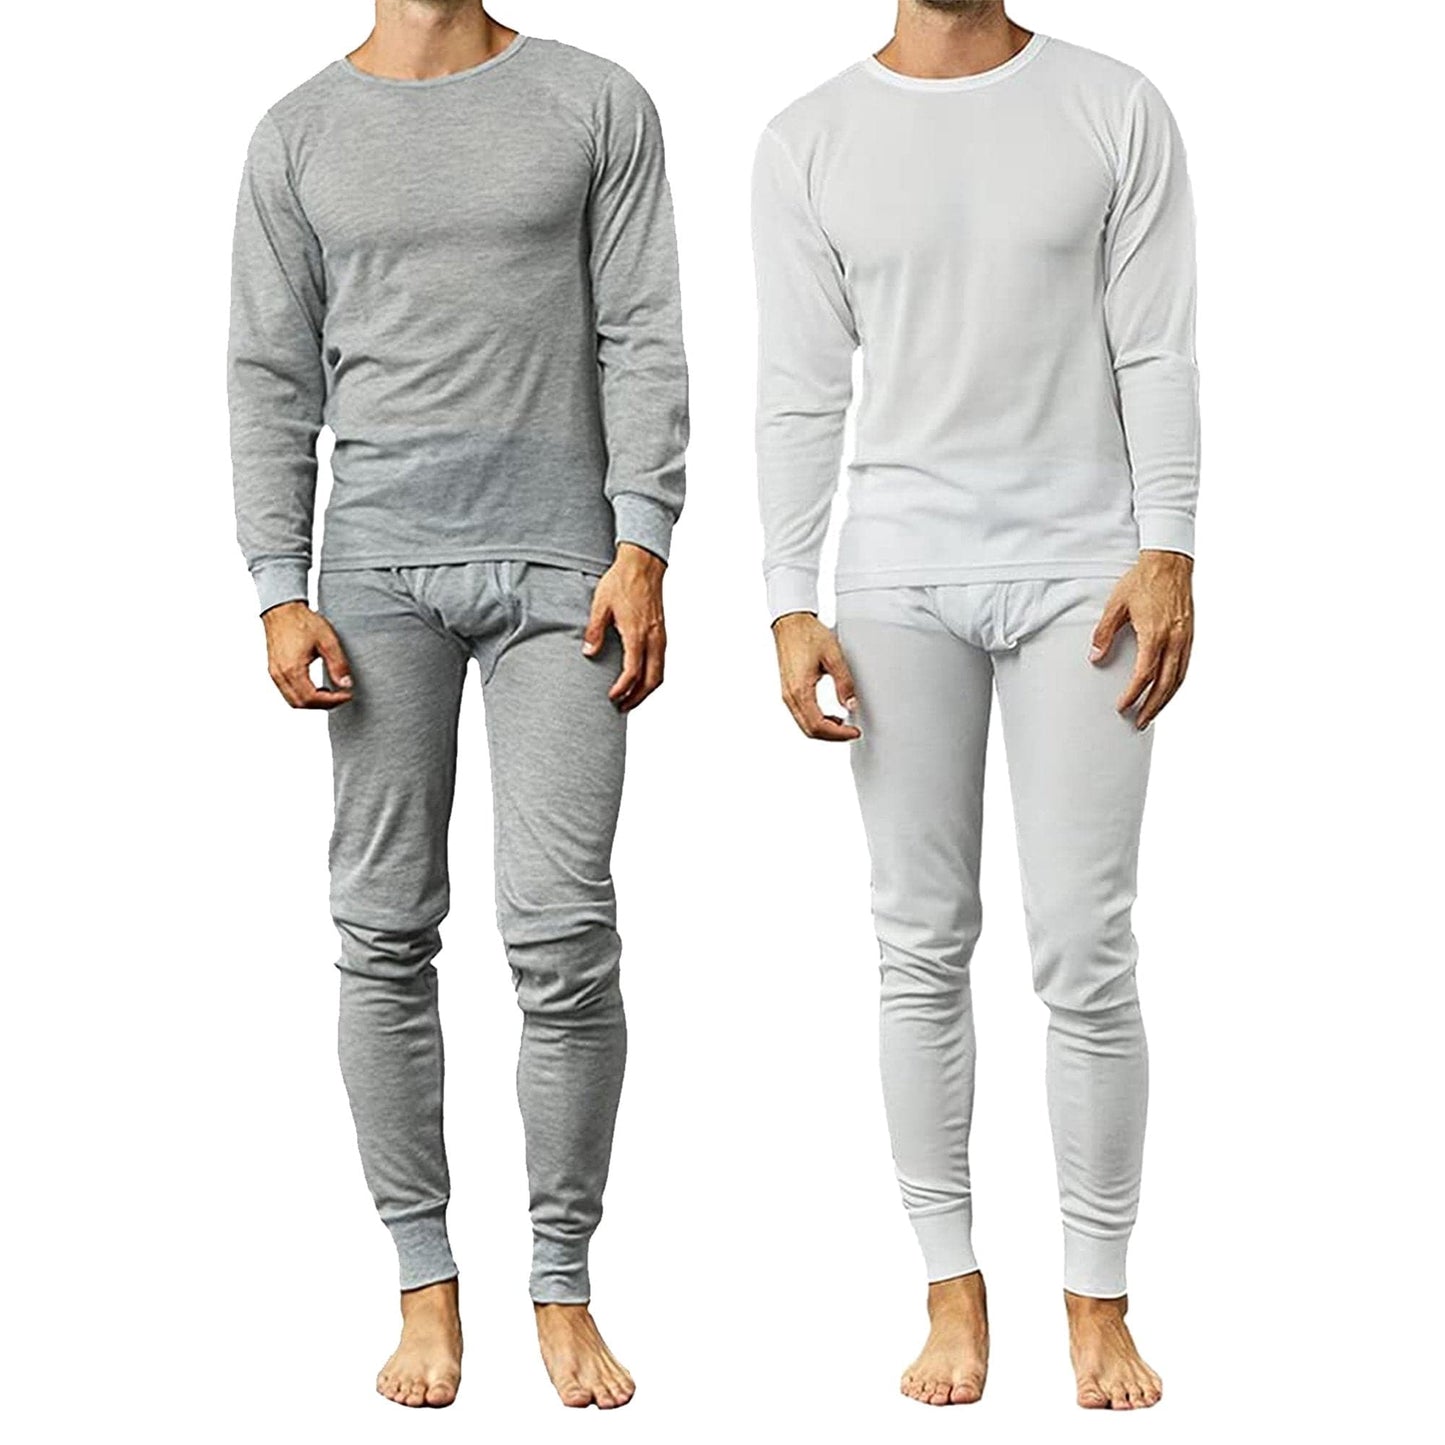 4-Piece Lightweight Thermal Set Of Both A Thermal Top And Bottom (2-Full Sets) - GalaxybyHarvic